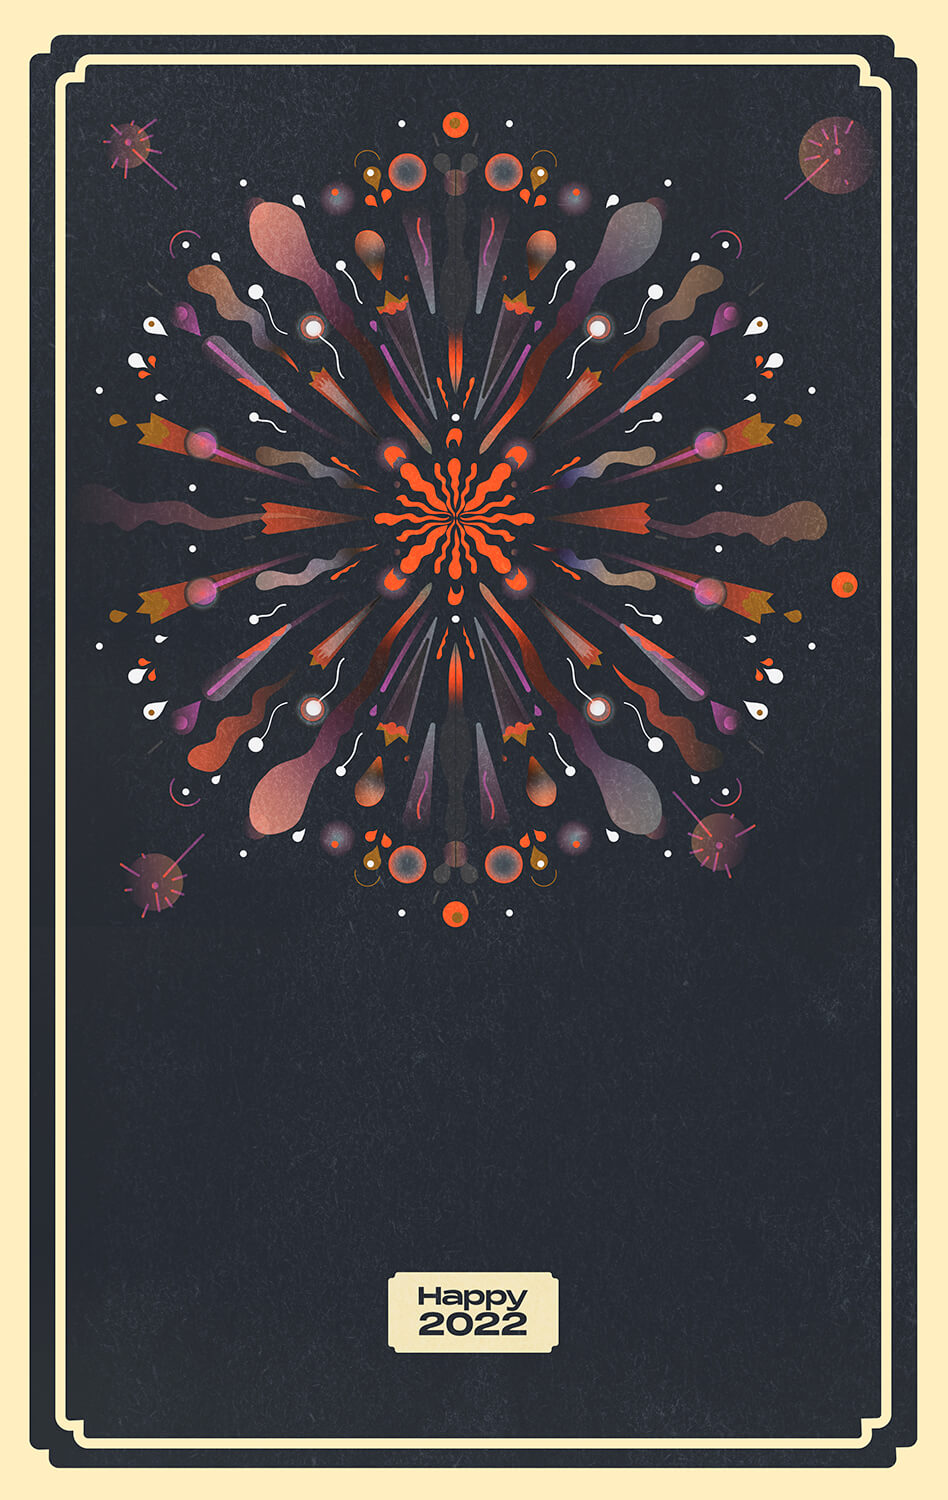 Happy 2022 wishes card with a fireworks explosion